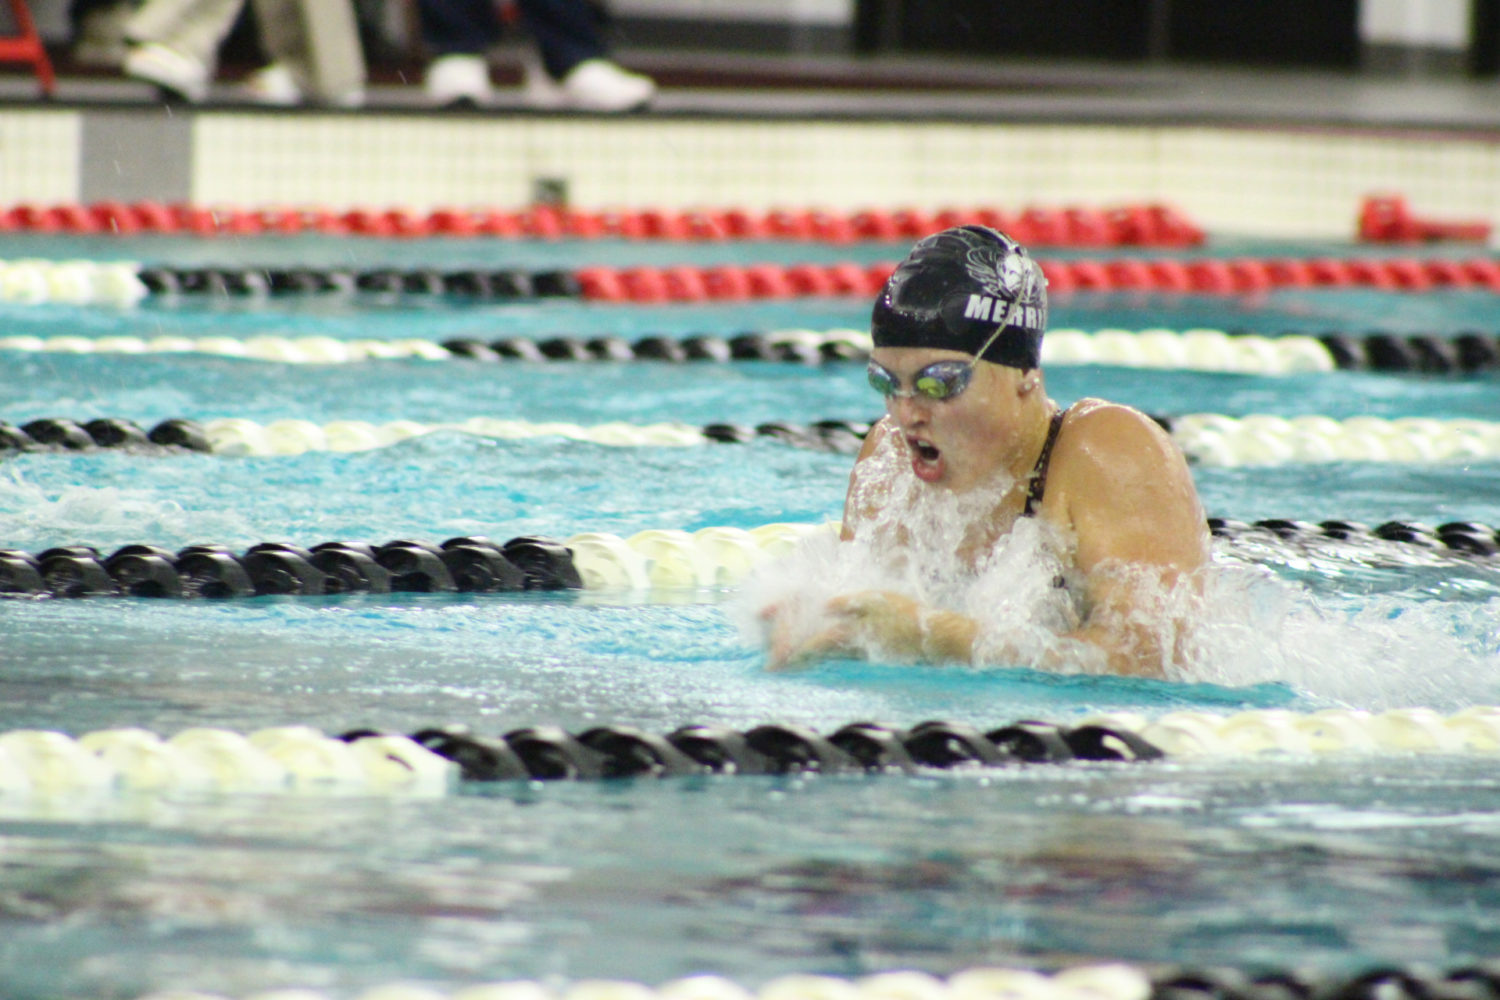 Winter Wins State Championship In The 100 Yard Breaststroke Event